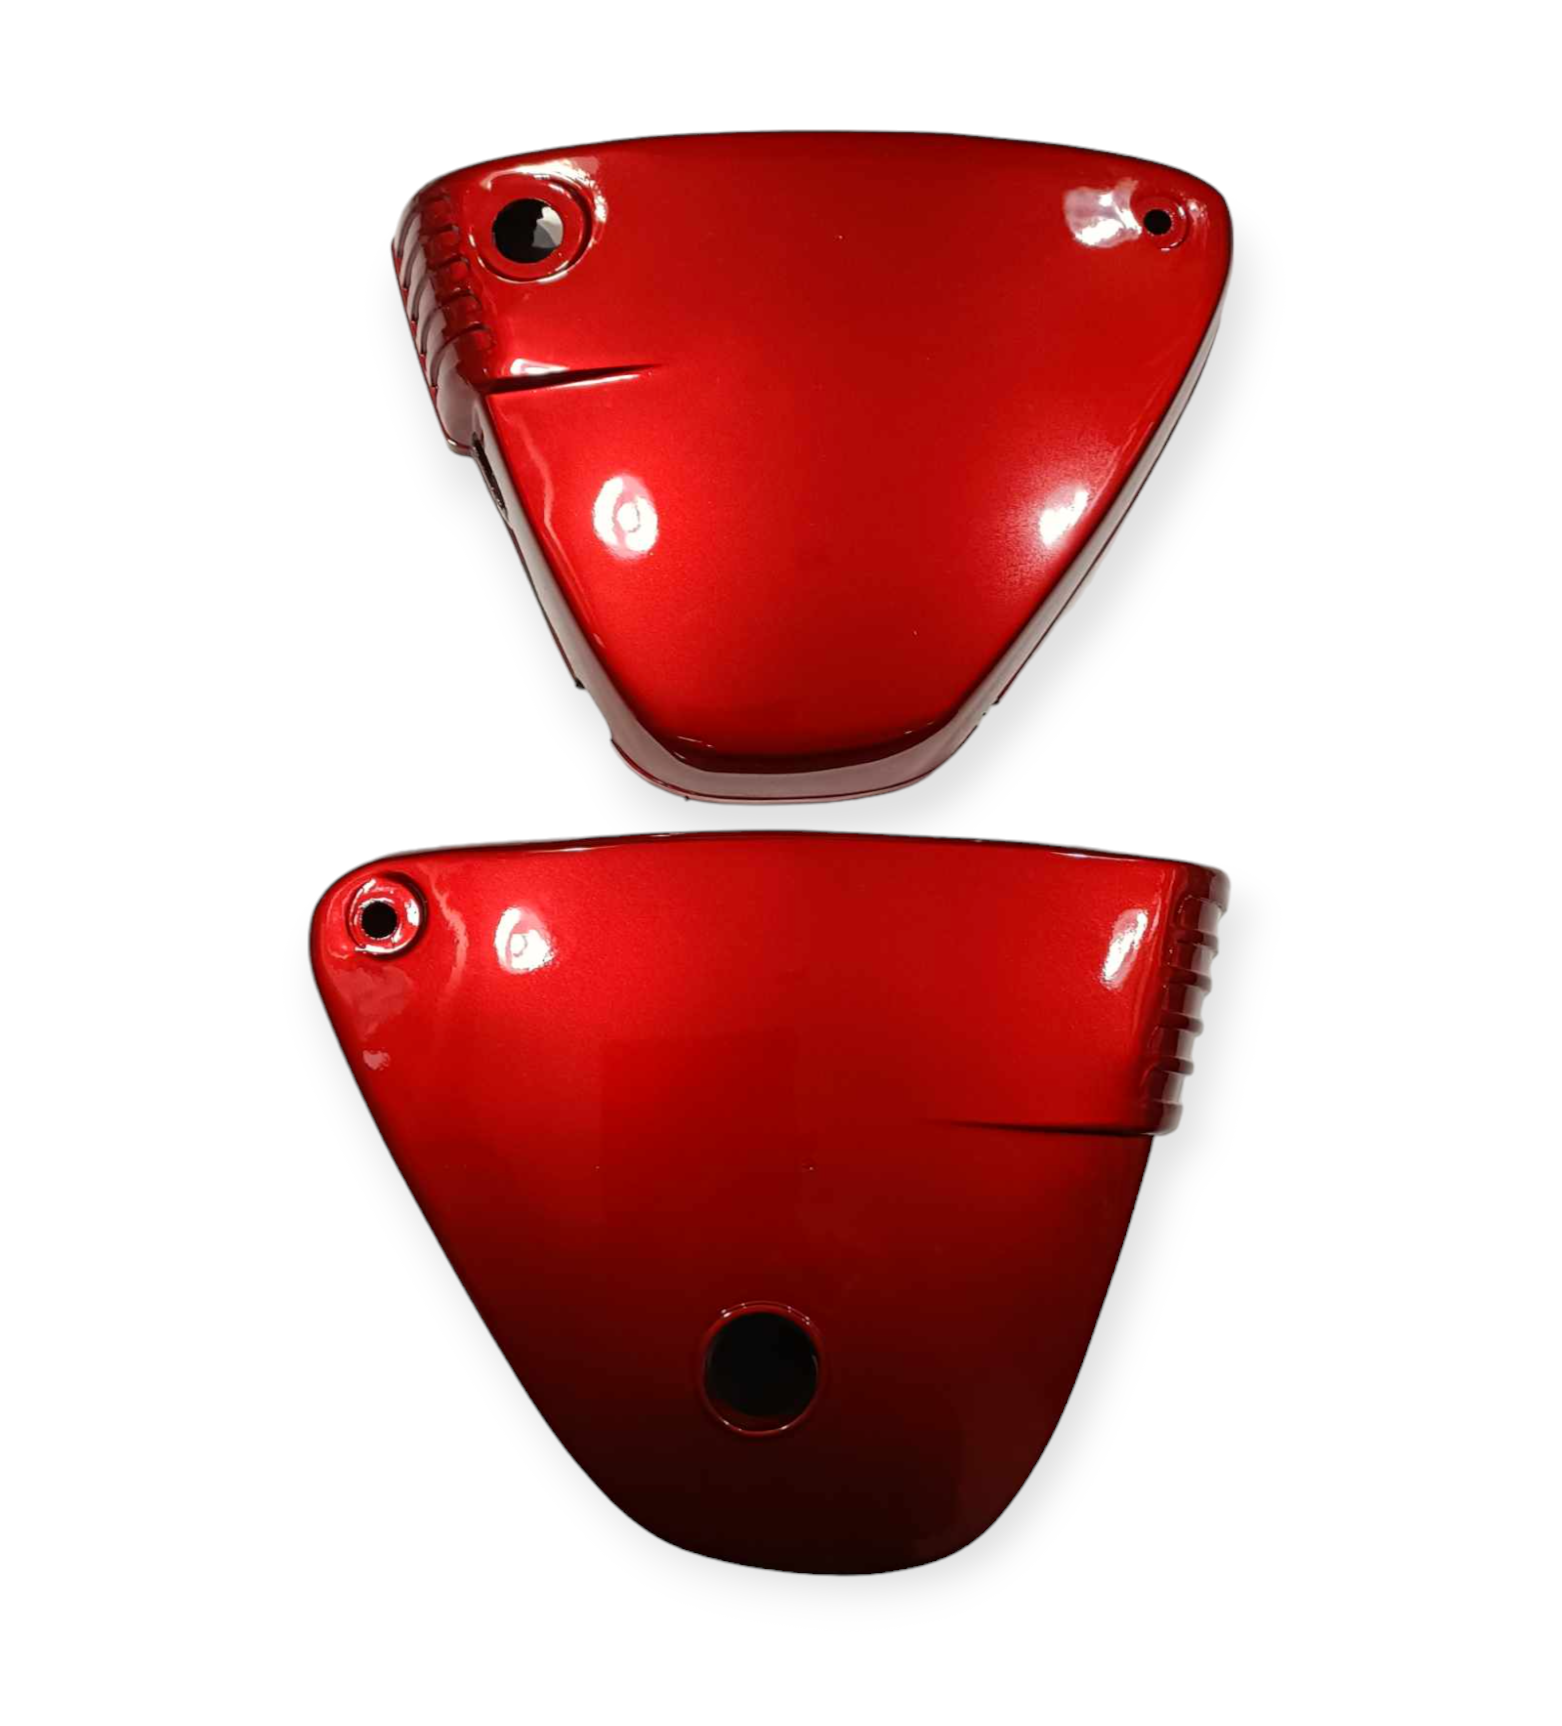 Suzuki A80 A100 AS100 Pair Of Motorcycle Side Panel Covers Brand New In Red